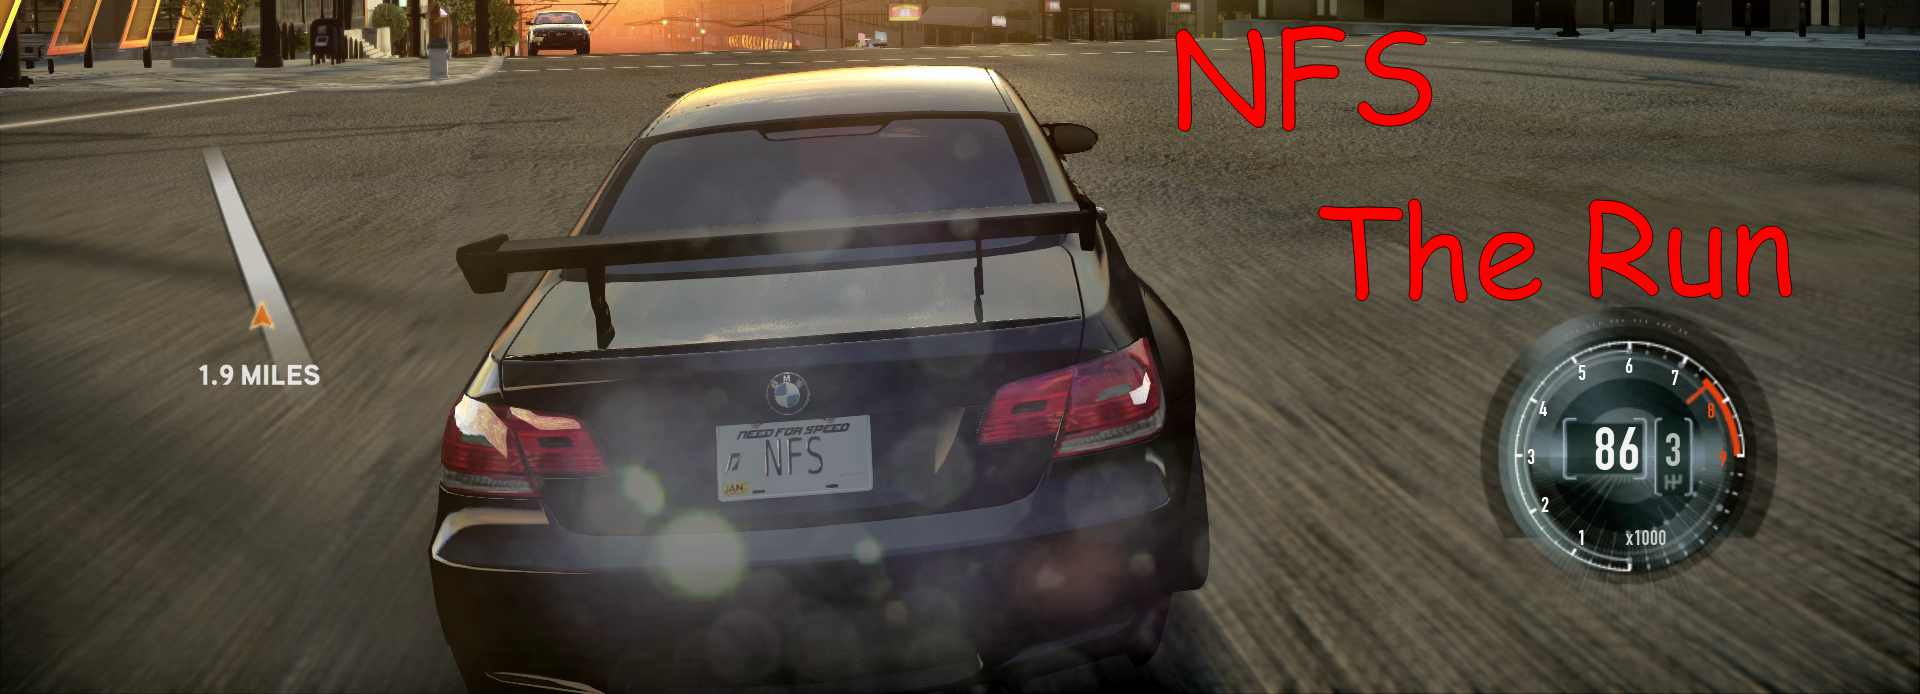 nfs 2019 pc game